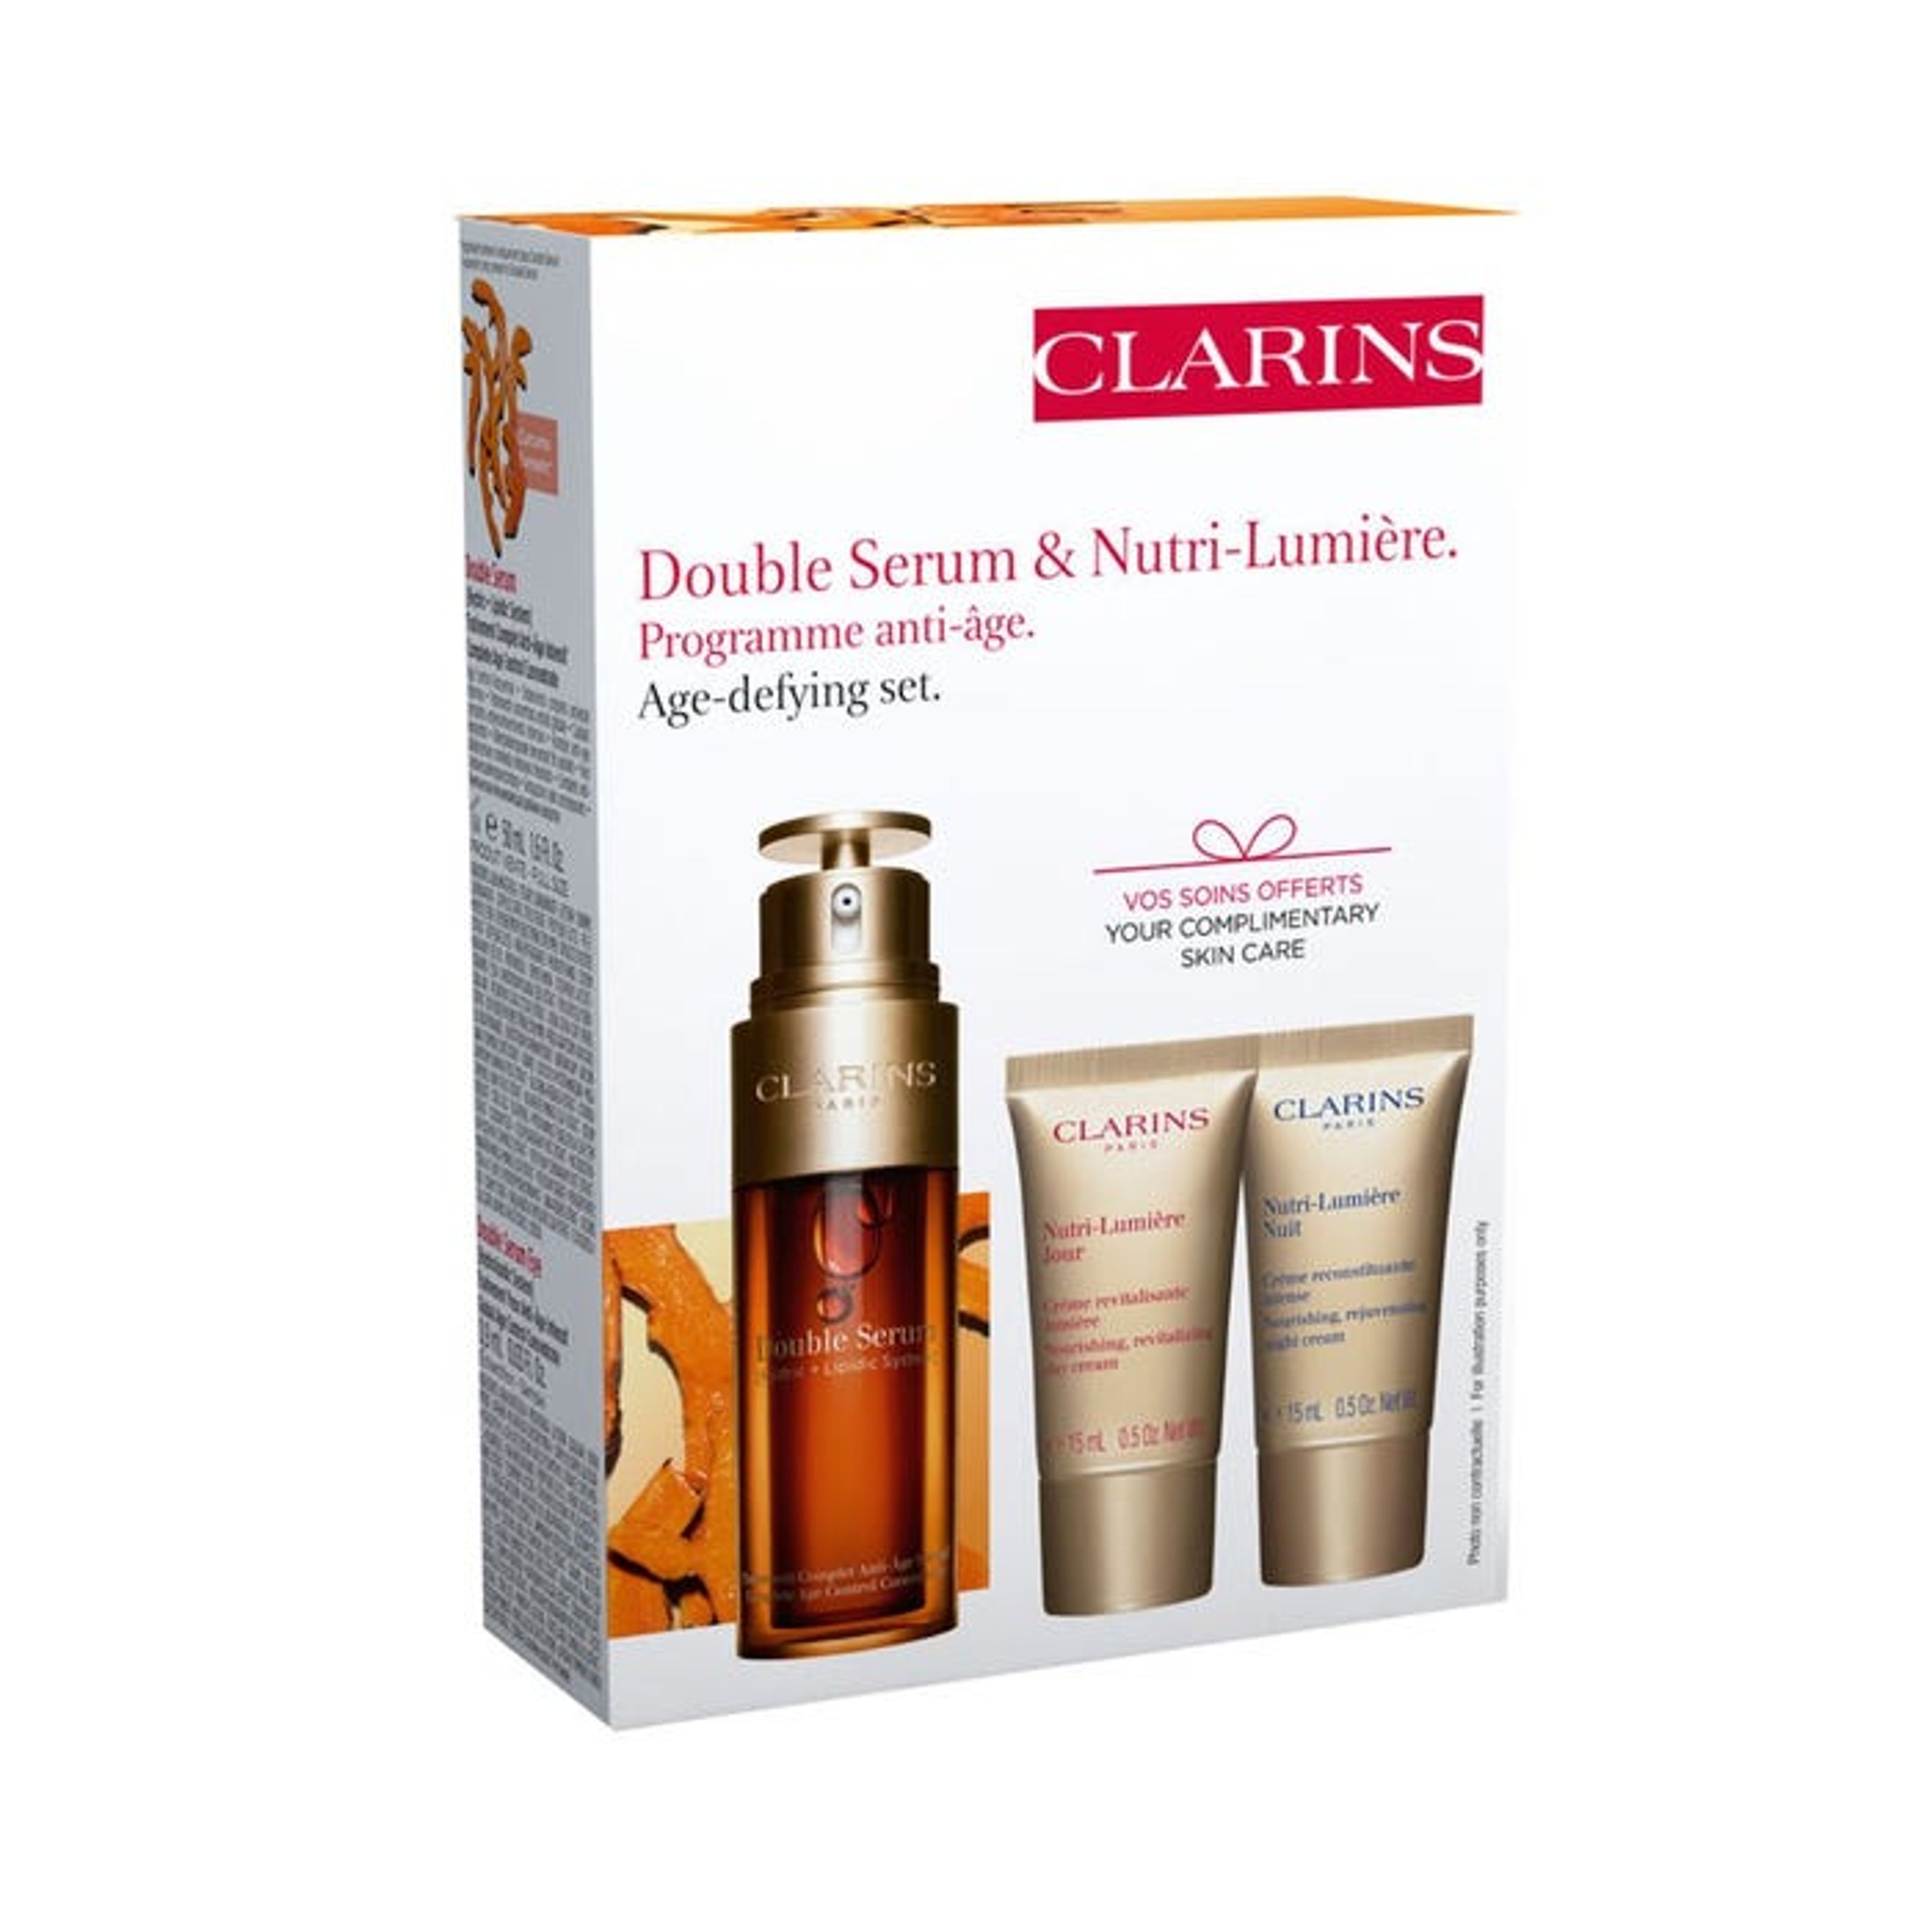 Clarins Value Pack Loyalty Double Serum & Nutri Lumiere 2